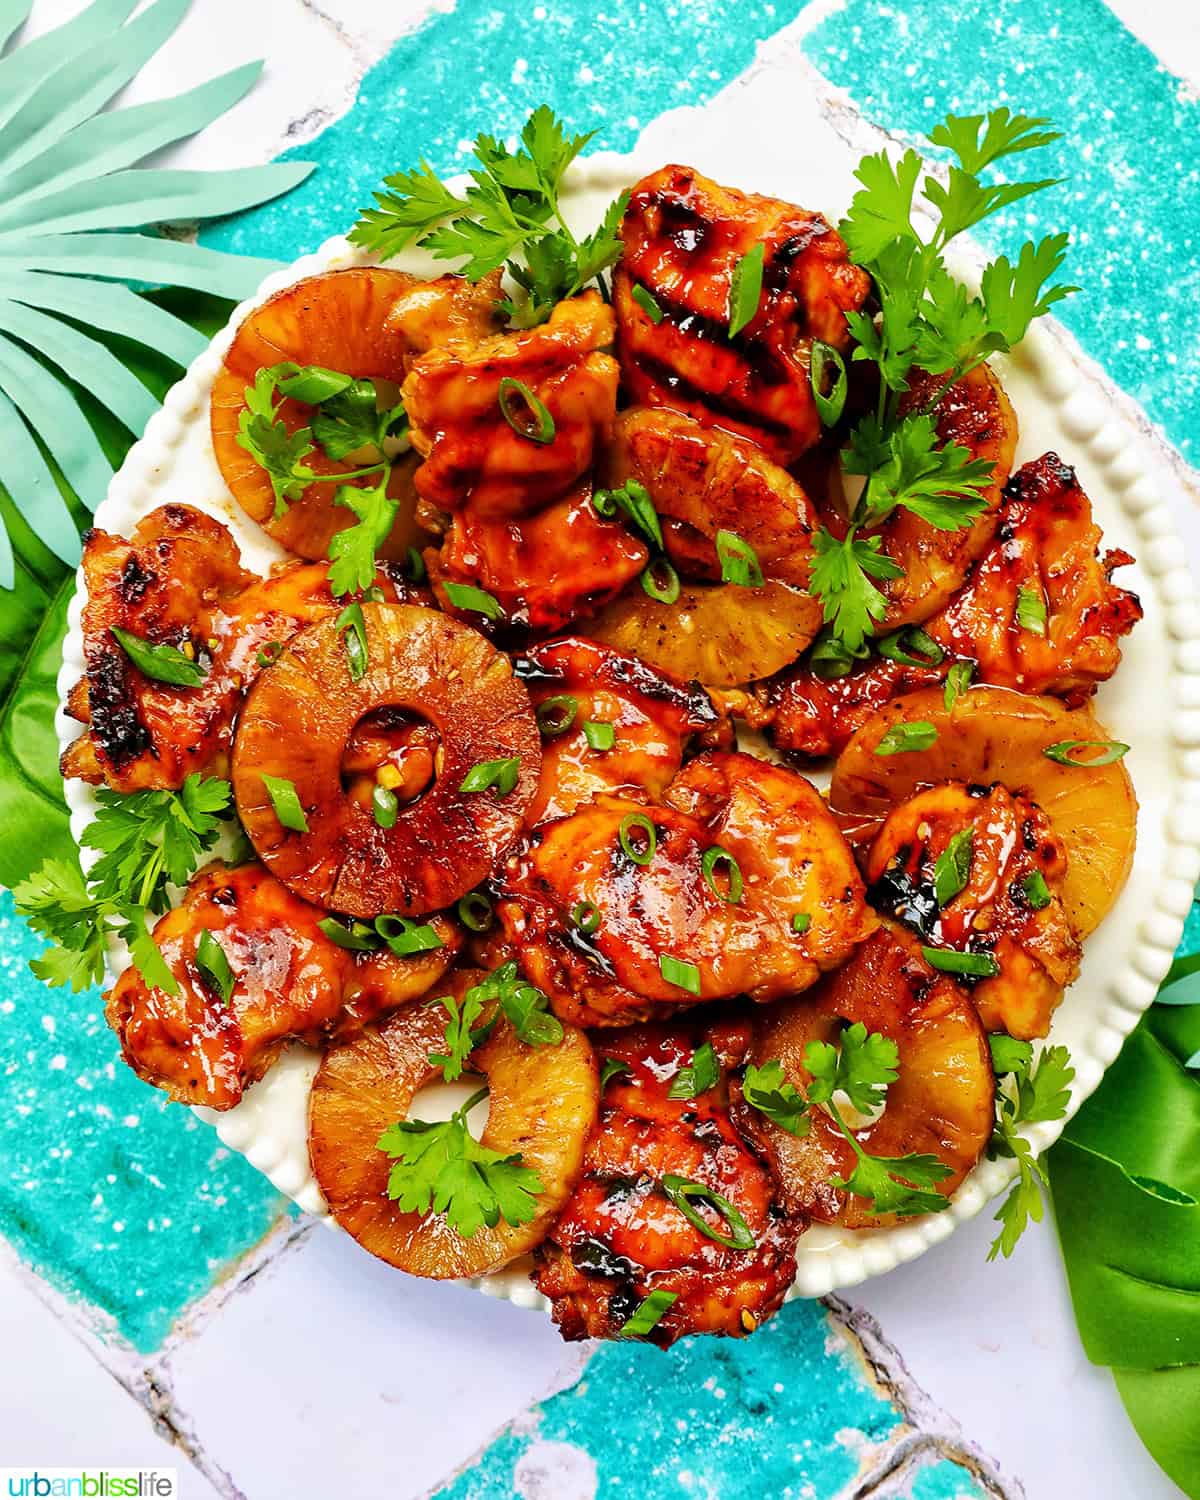 plate of BBQ chicken and pineapples with herbs.